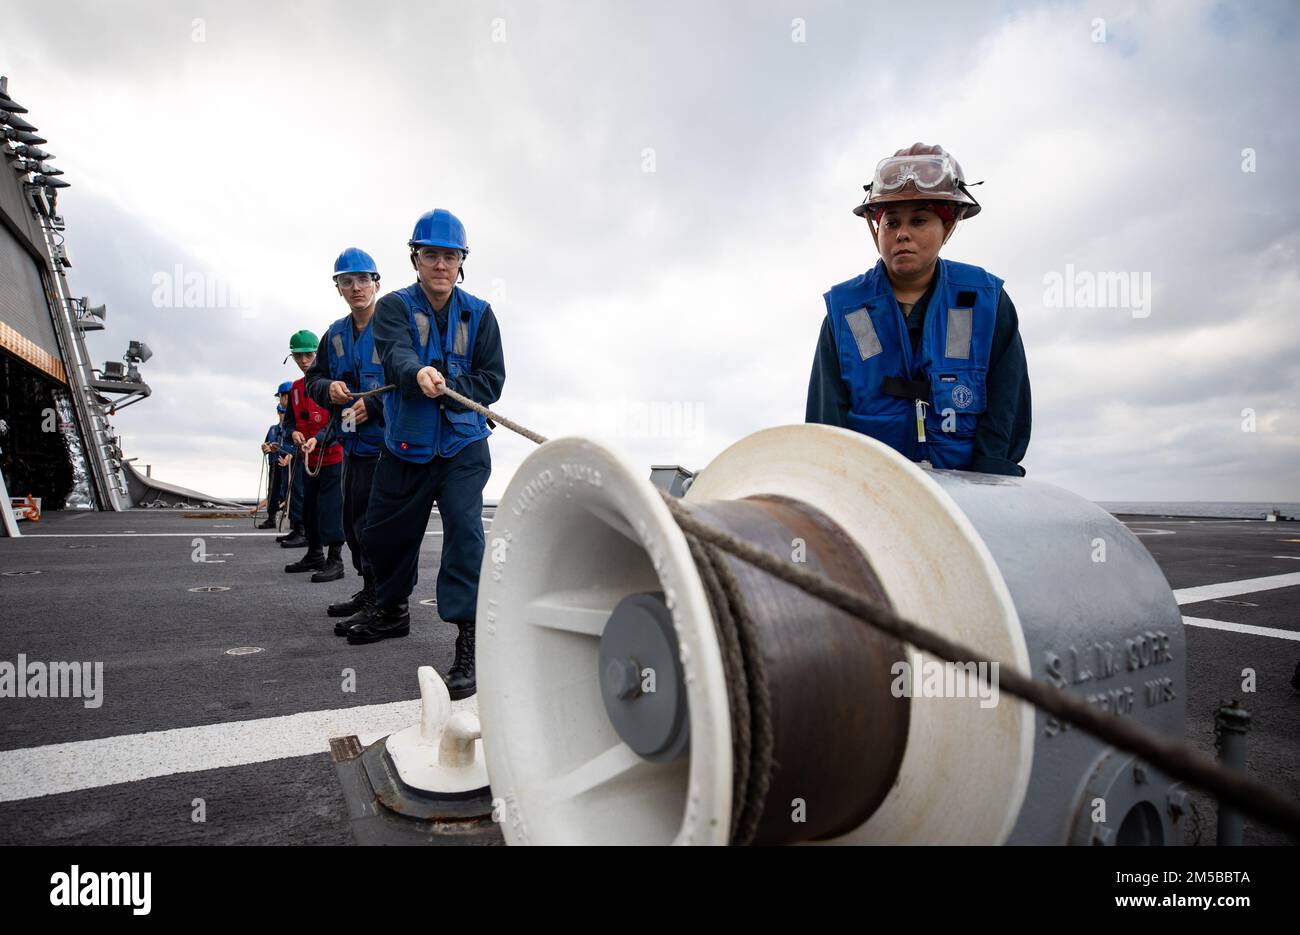 220219-N-LI768-1084  SOUTH CHINA SEA (Feb. 19, 2022) – Sailors heave around on a line aboard the Independence-variant littoral combat ship USS Tulsa (LCS 16) during a replenishment-at-sea. Tulsa, part of Destroyer Squadron (DESRON) 7, is on a rotational deployment, operating in the U.S. 7th Fleet area of operations to enhance interoperability with partners and serve as a ready-response force in support of a free and open Indo-Pacific region. Stock Photo